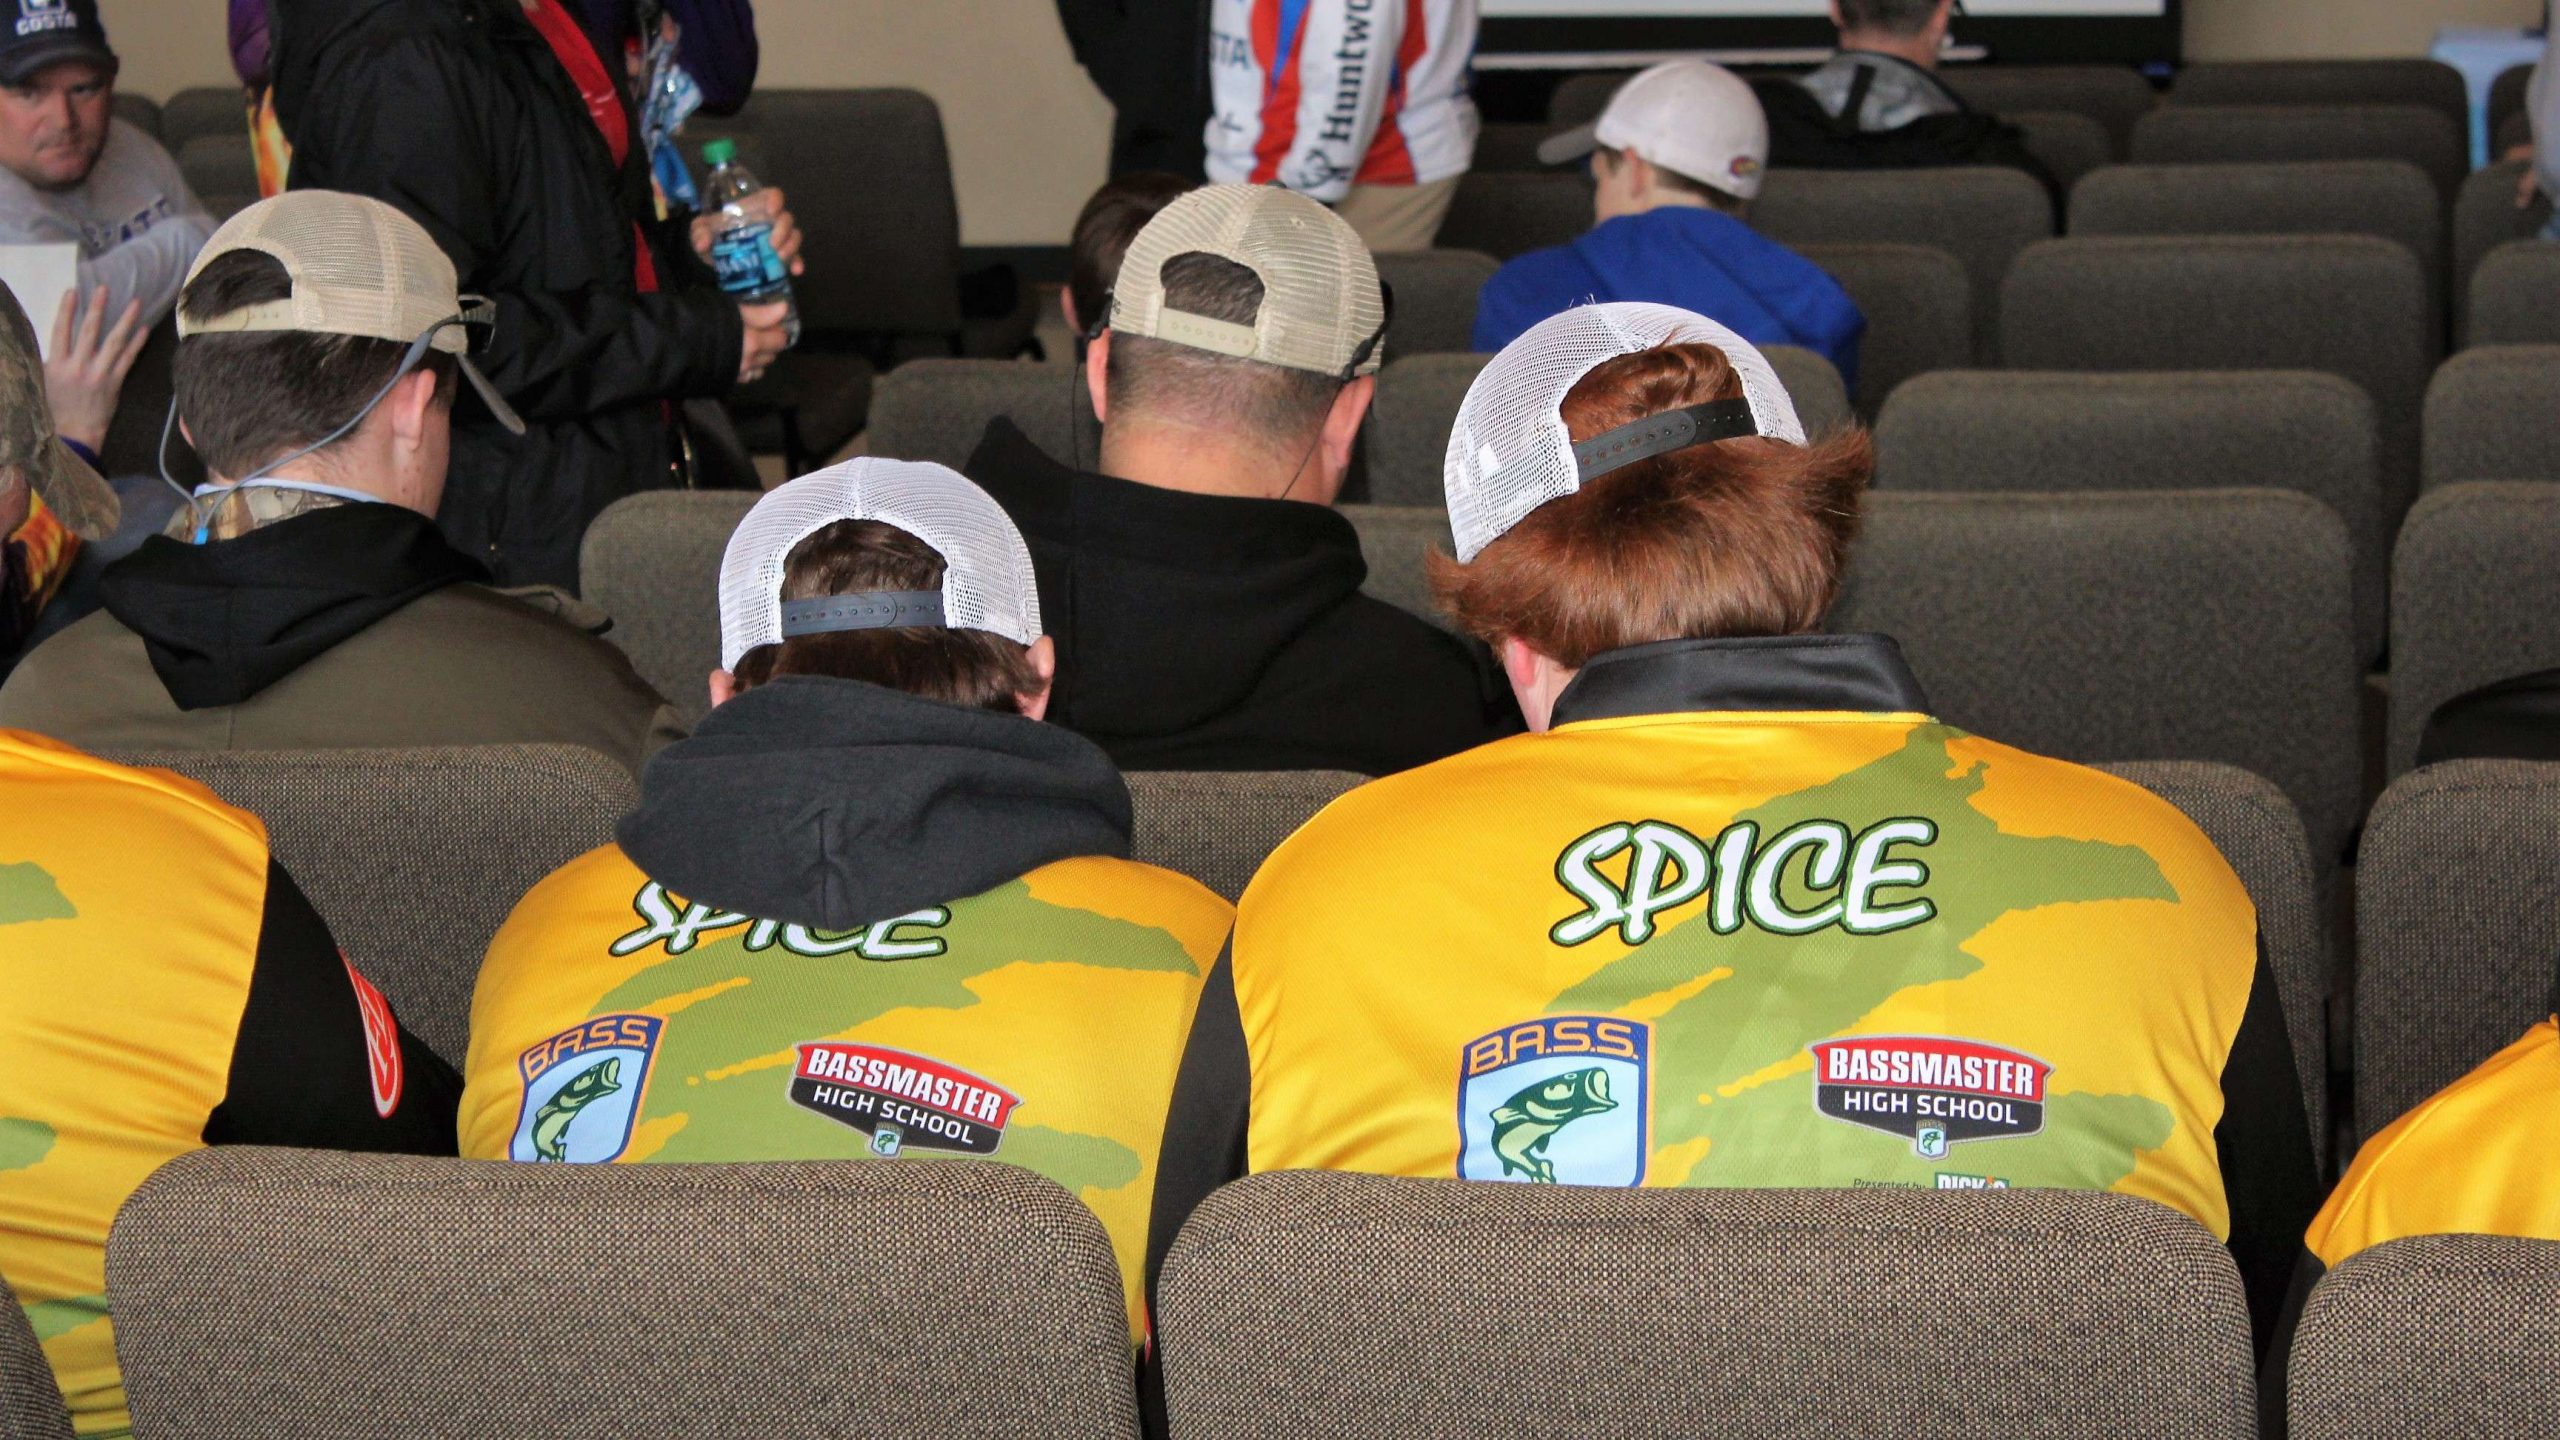 Brenden and Logan Spice sport the B.A.S.S. and Bassmaster High School logos on the backs of their Everest (Wisc.) High School jerseys.